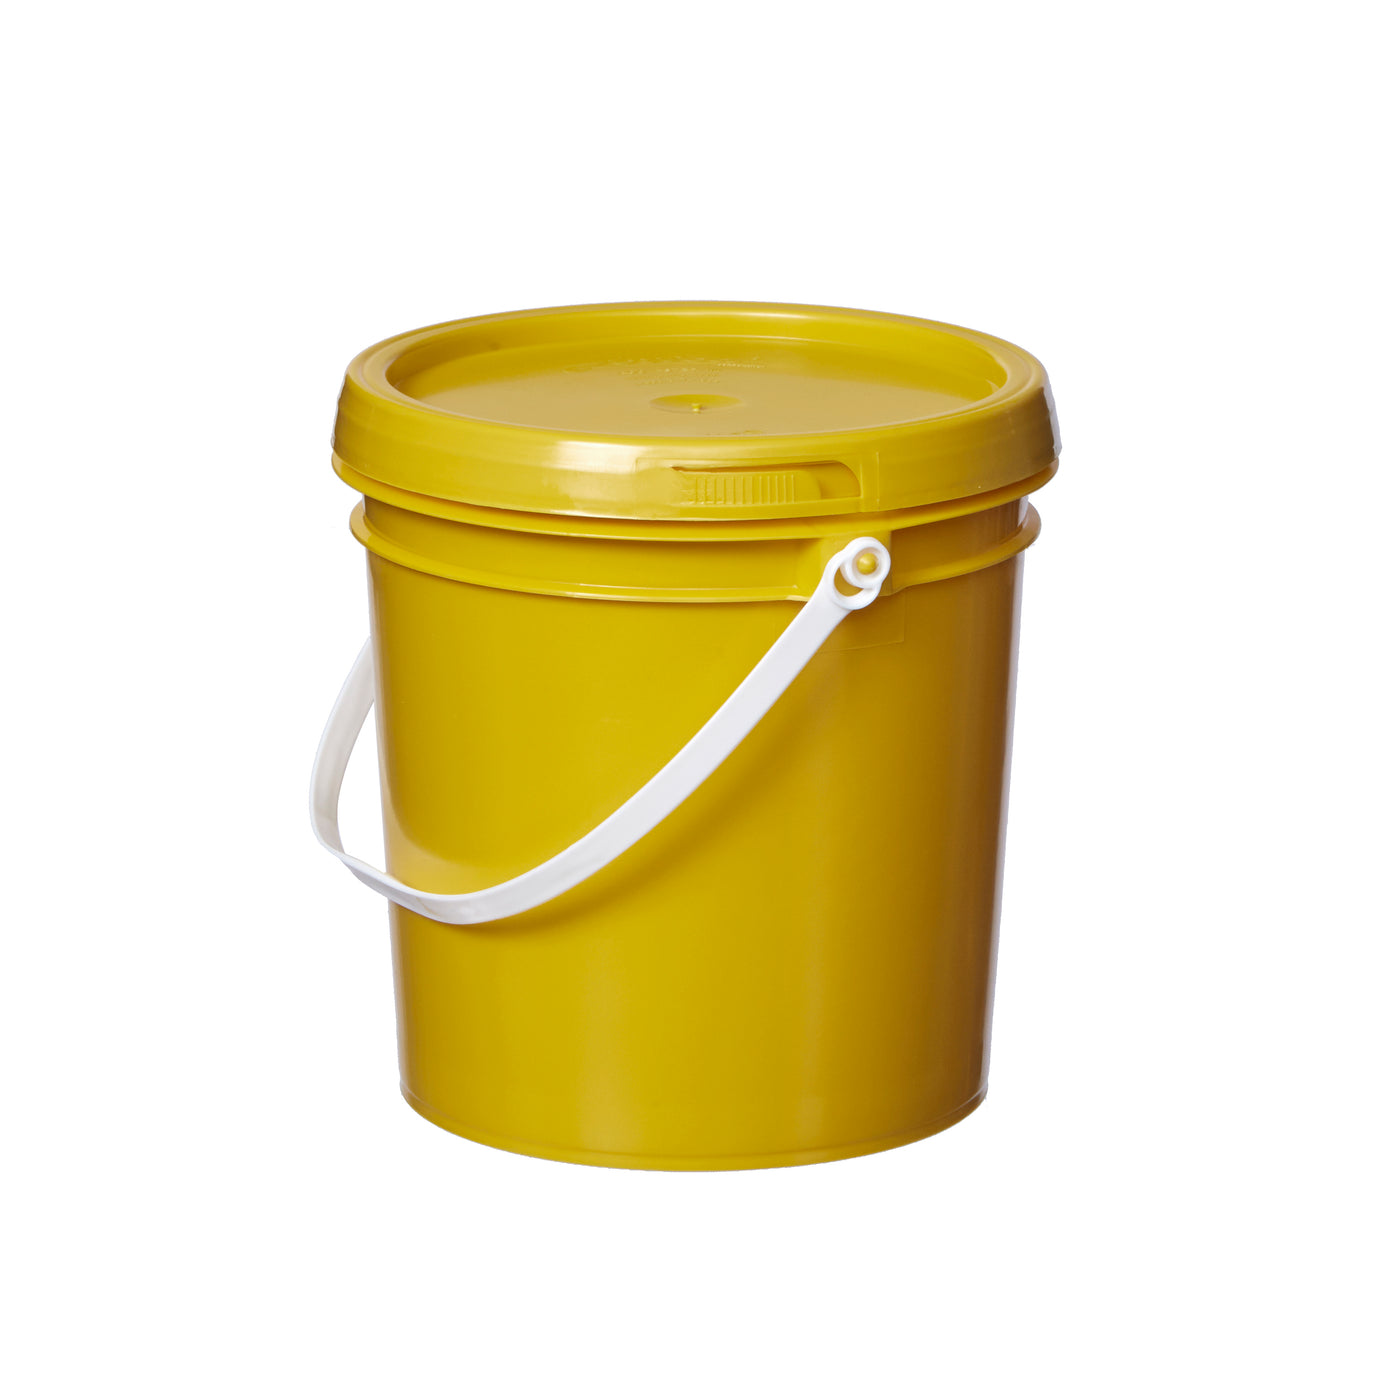 5 Gallon Plastic Bucket Accessories, Made by Affordable Buckets